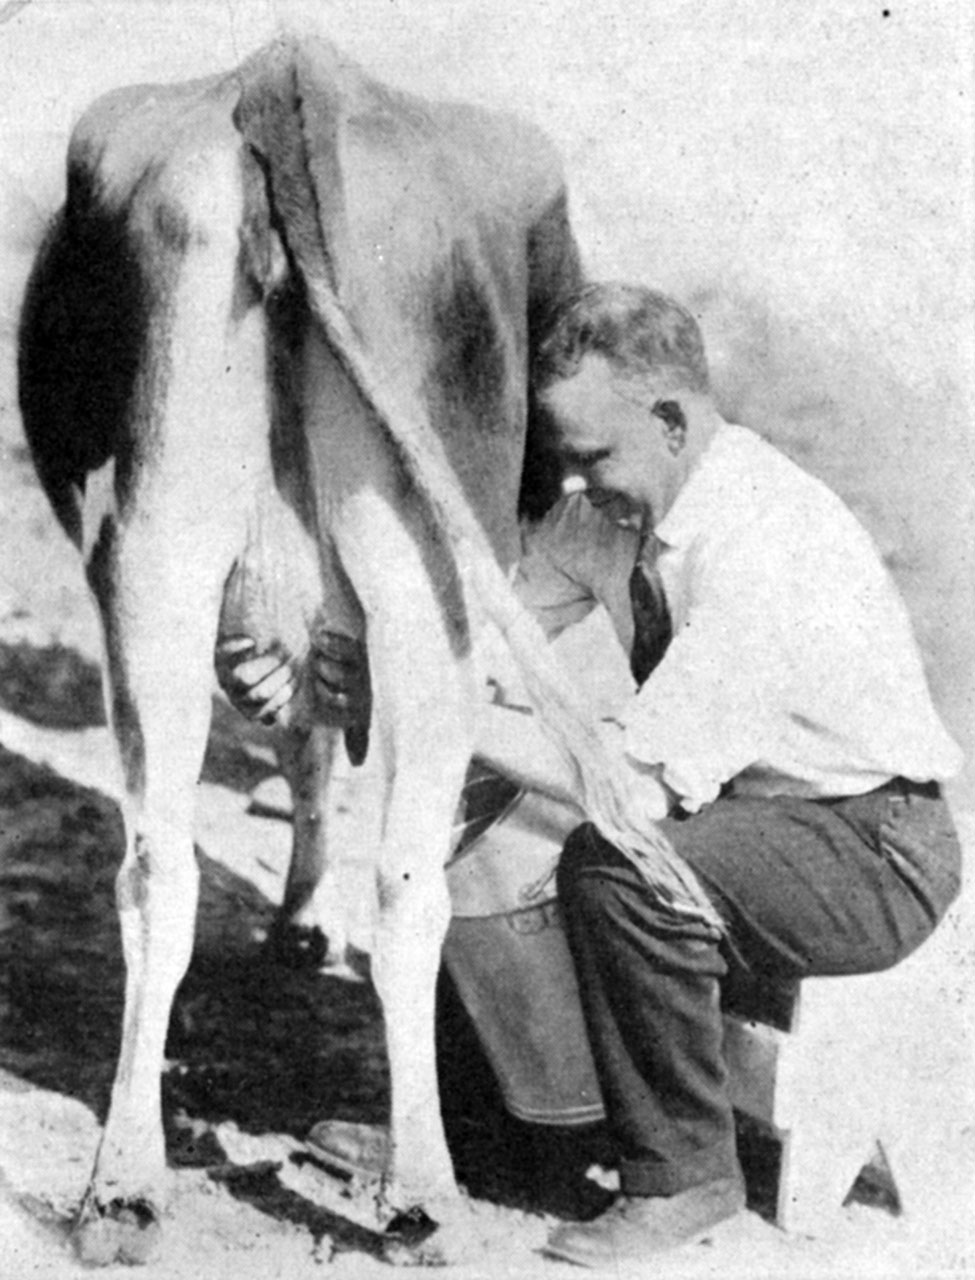 Milking the Cow Correctly